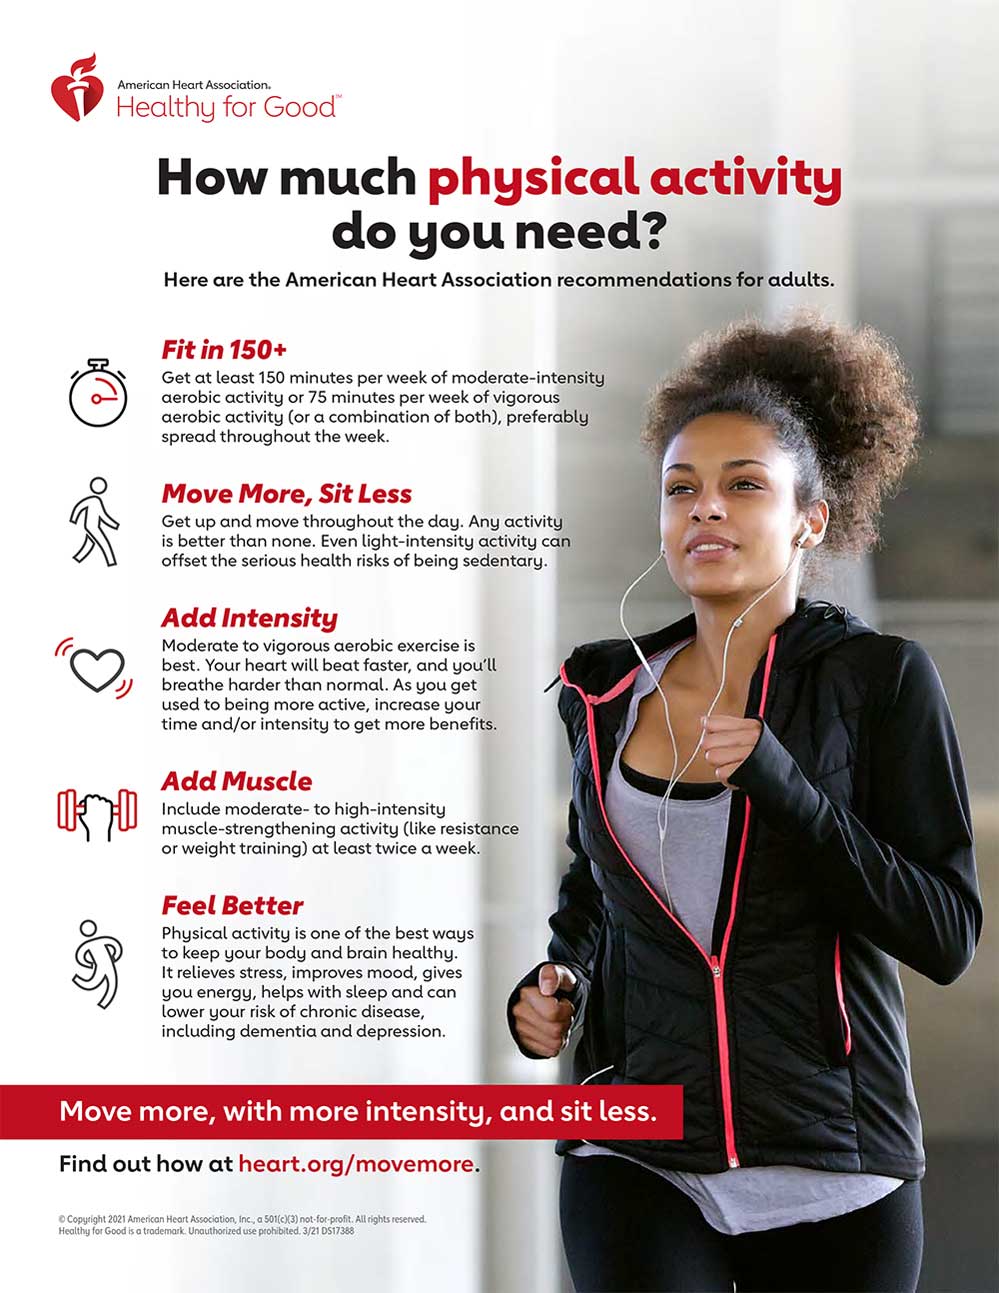 Activities before and during participation in the fitness program (in